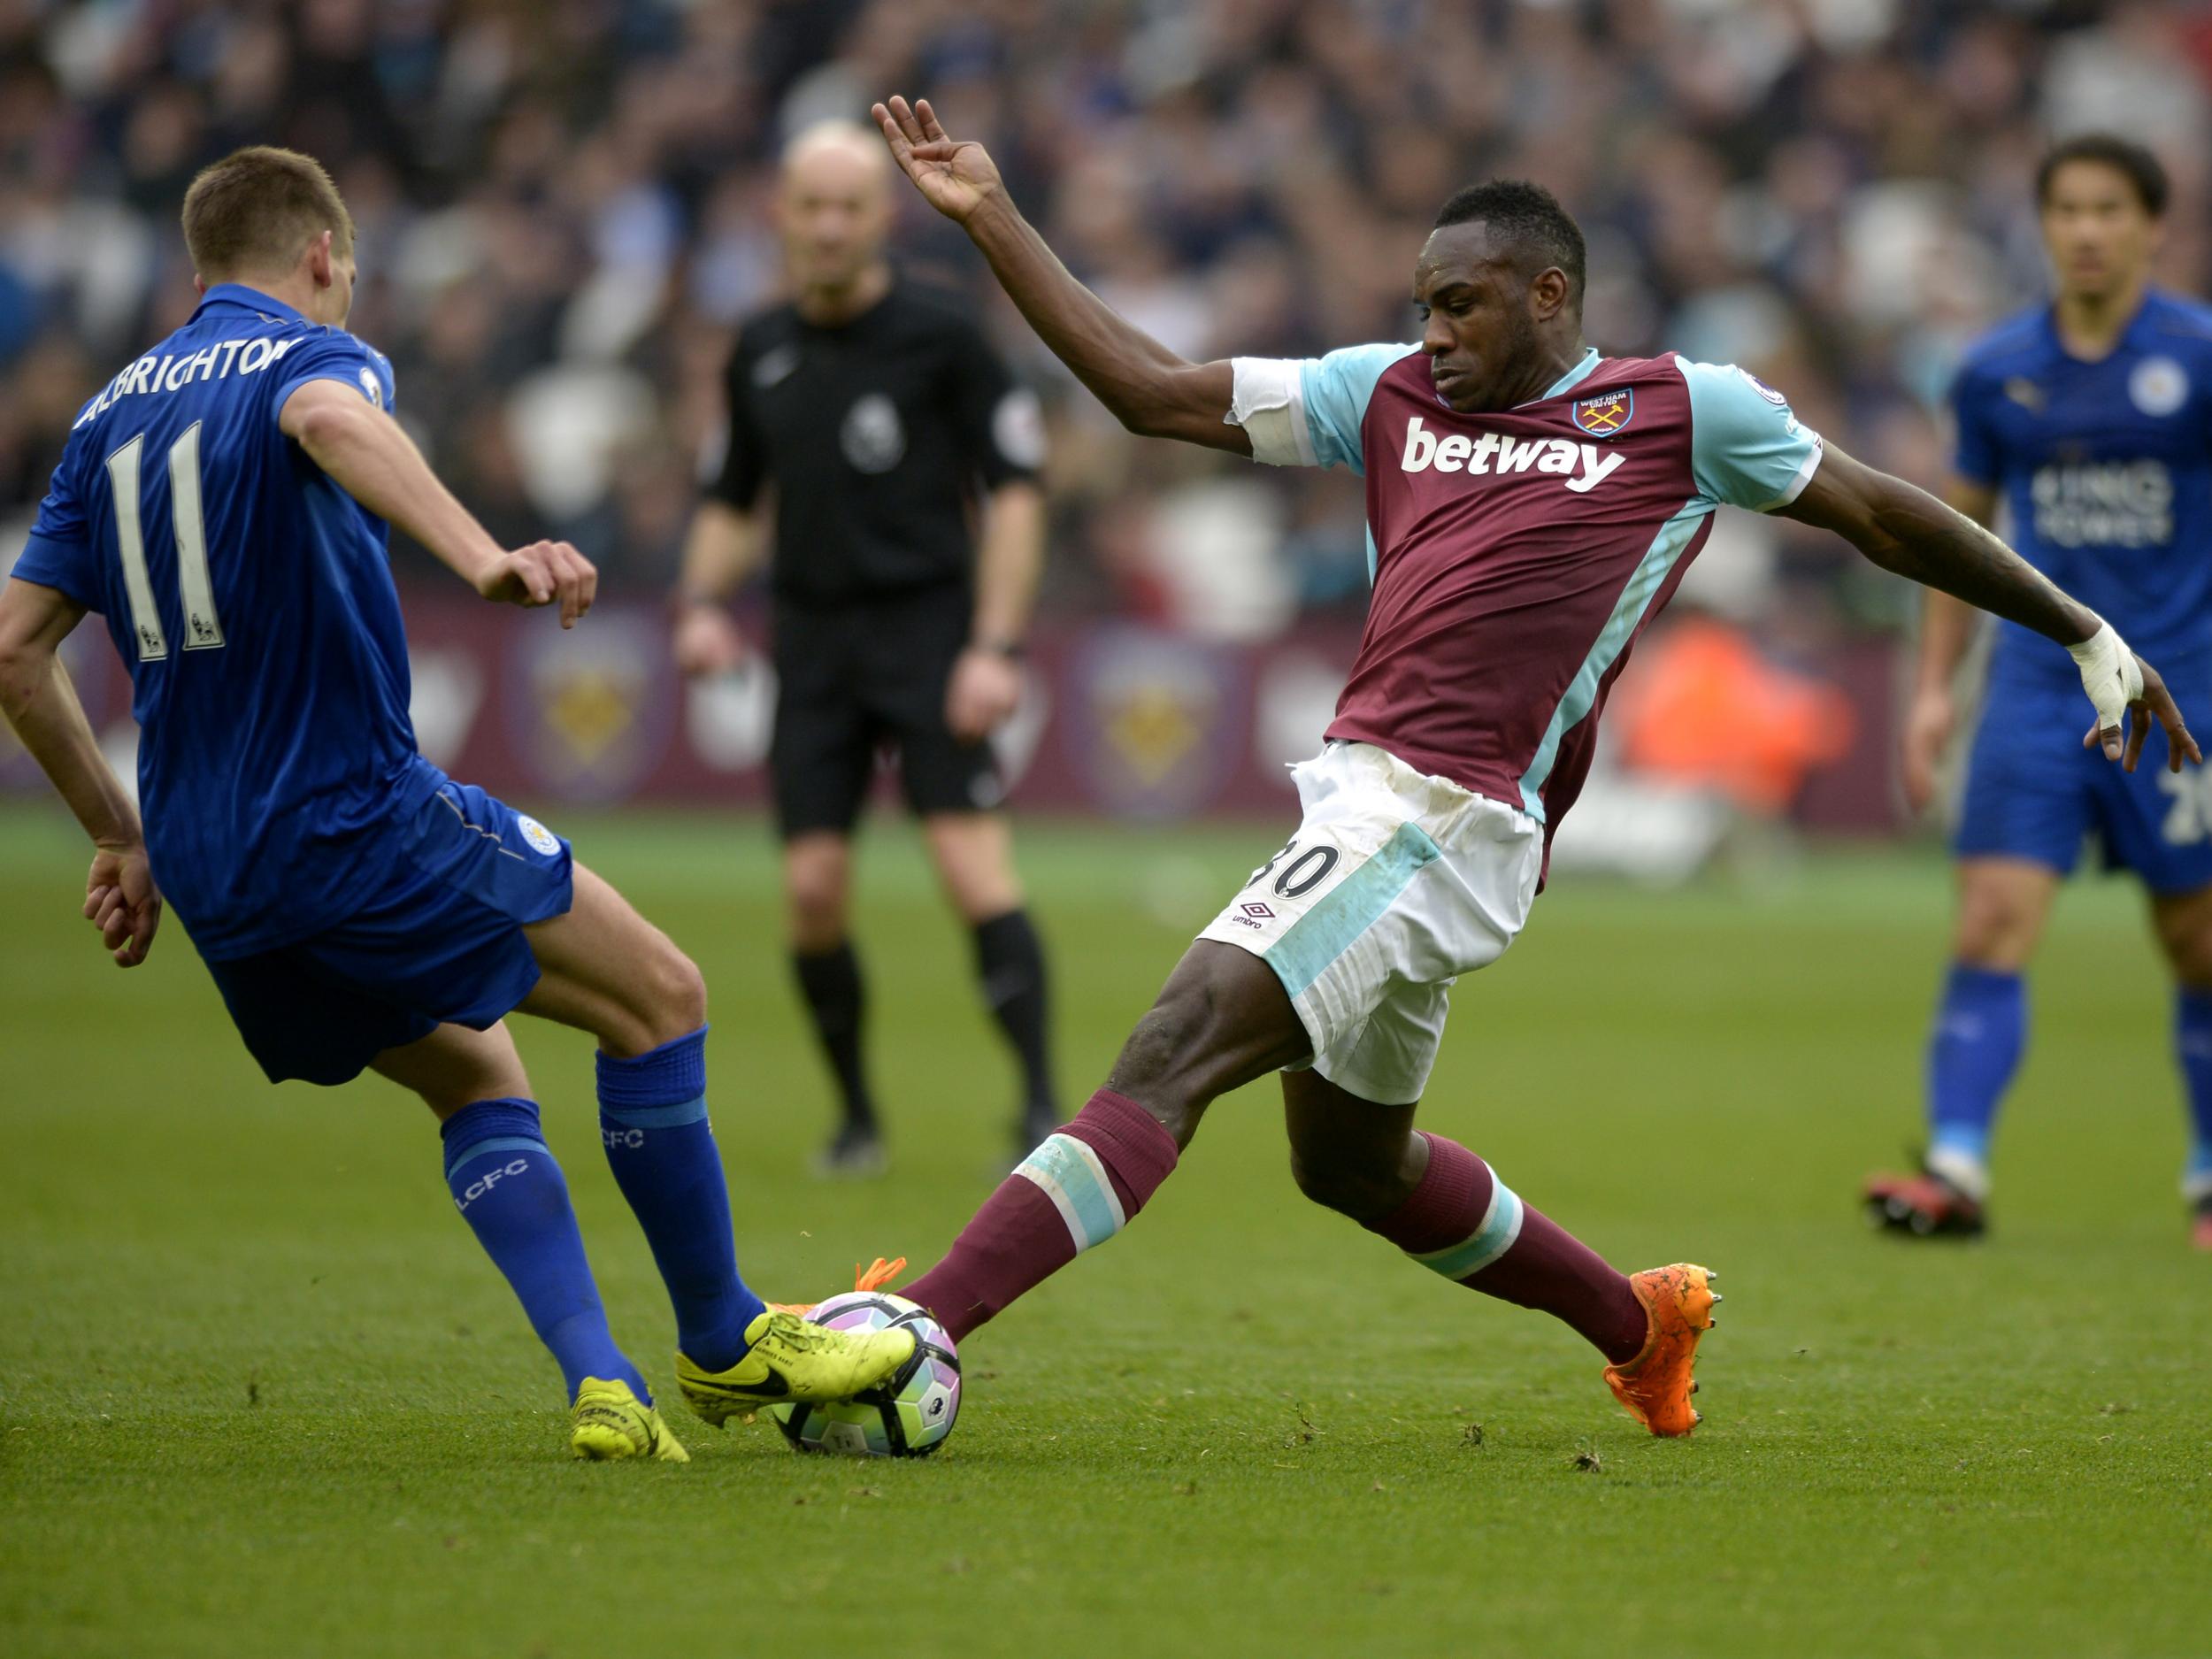 Antonio suffered an injury in the 3-2 defeat to Leicester